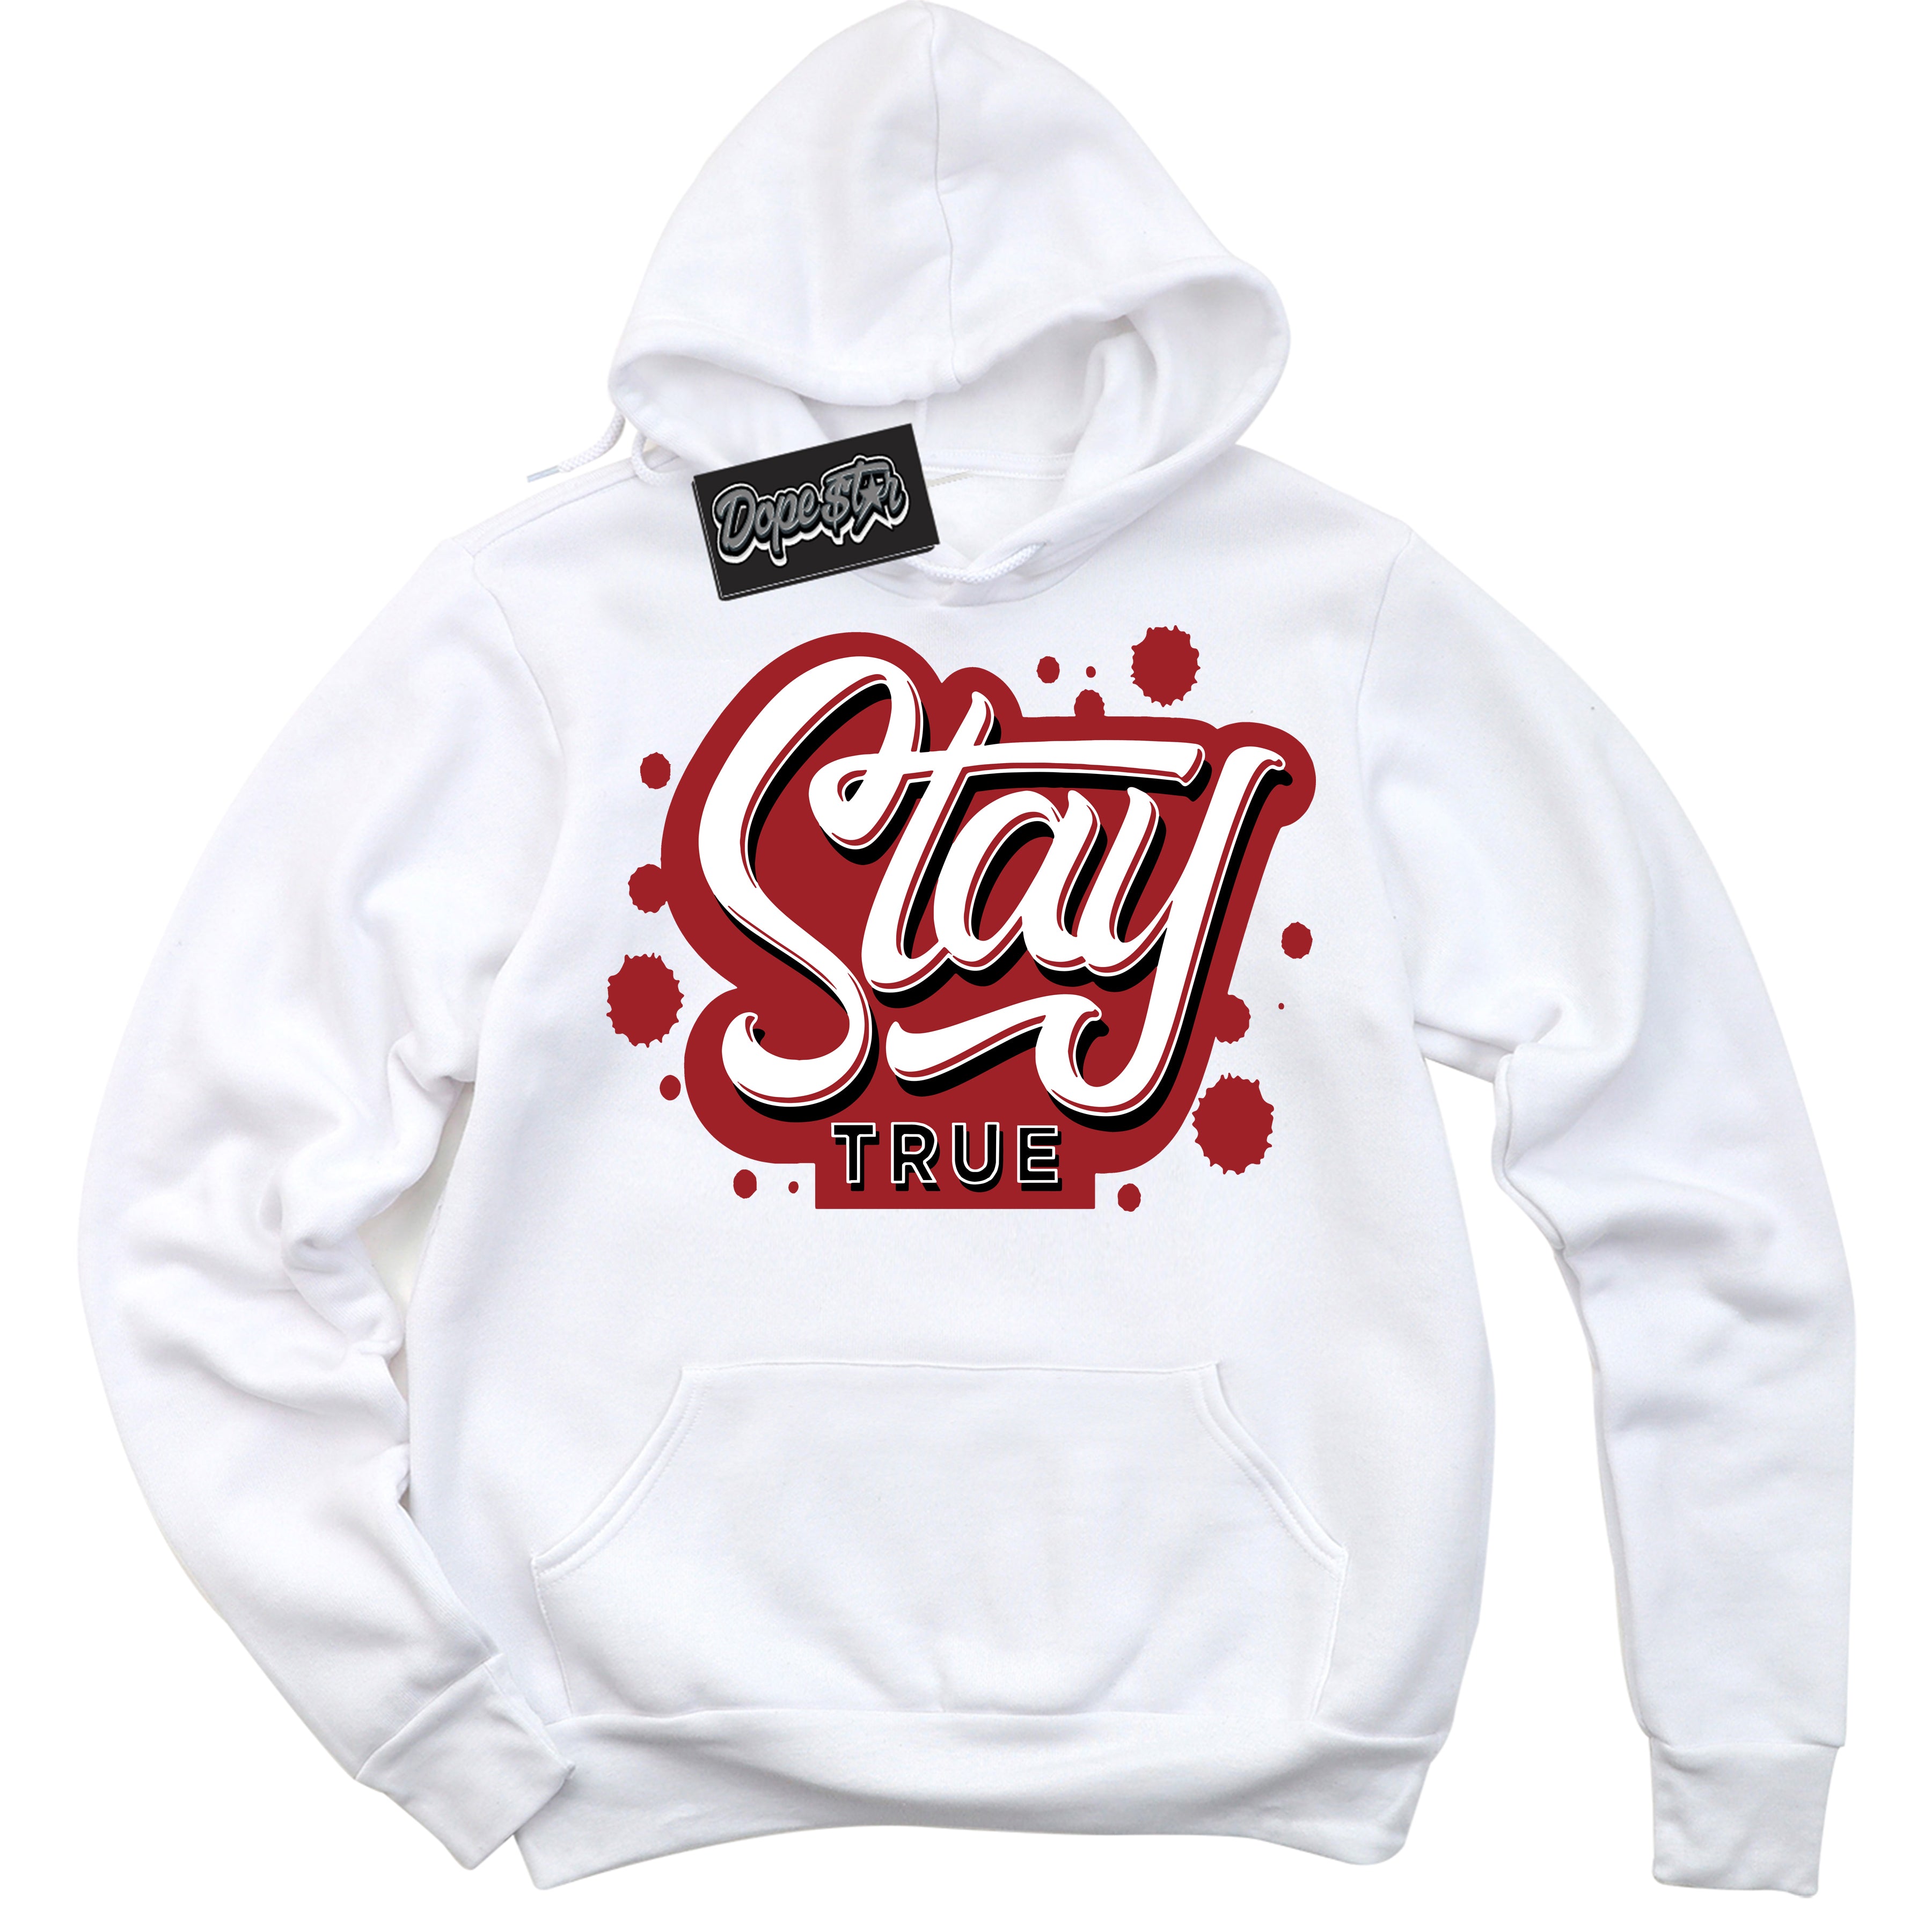 Cool White Hoodie With “ Stay True “  Design That Perfectly Matches Lost And Found 1s Sneakers.